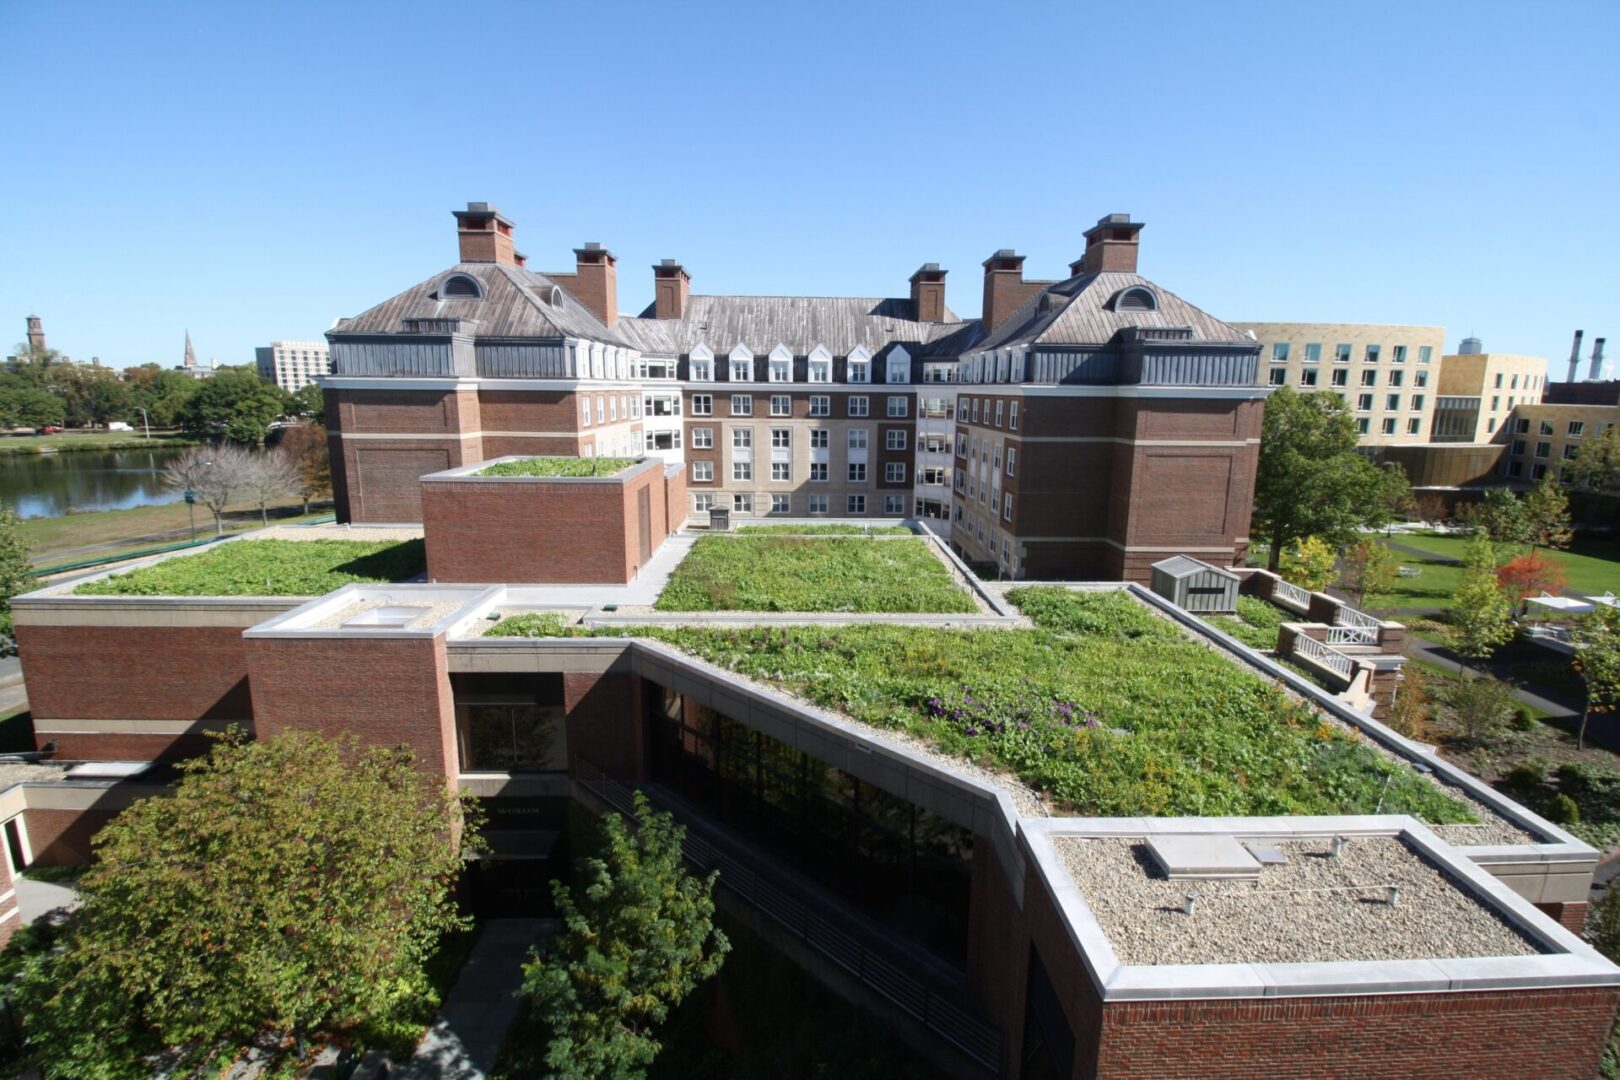 A view of the Harvard green roof for the building